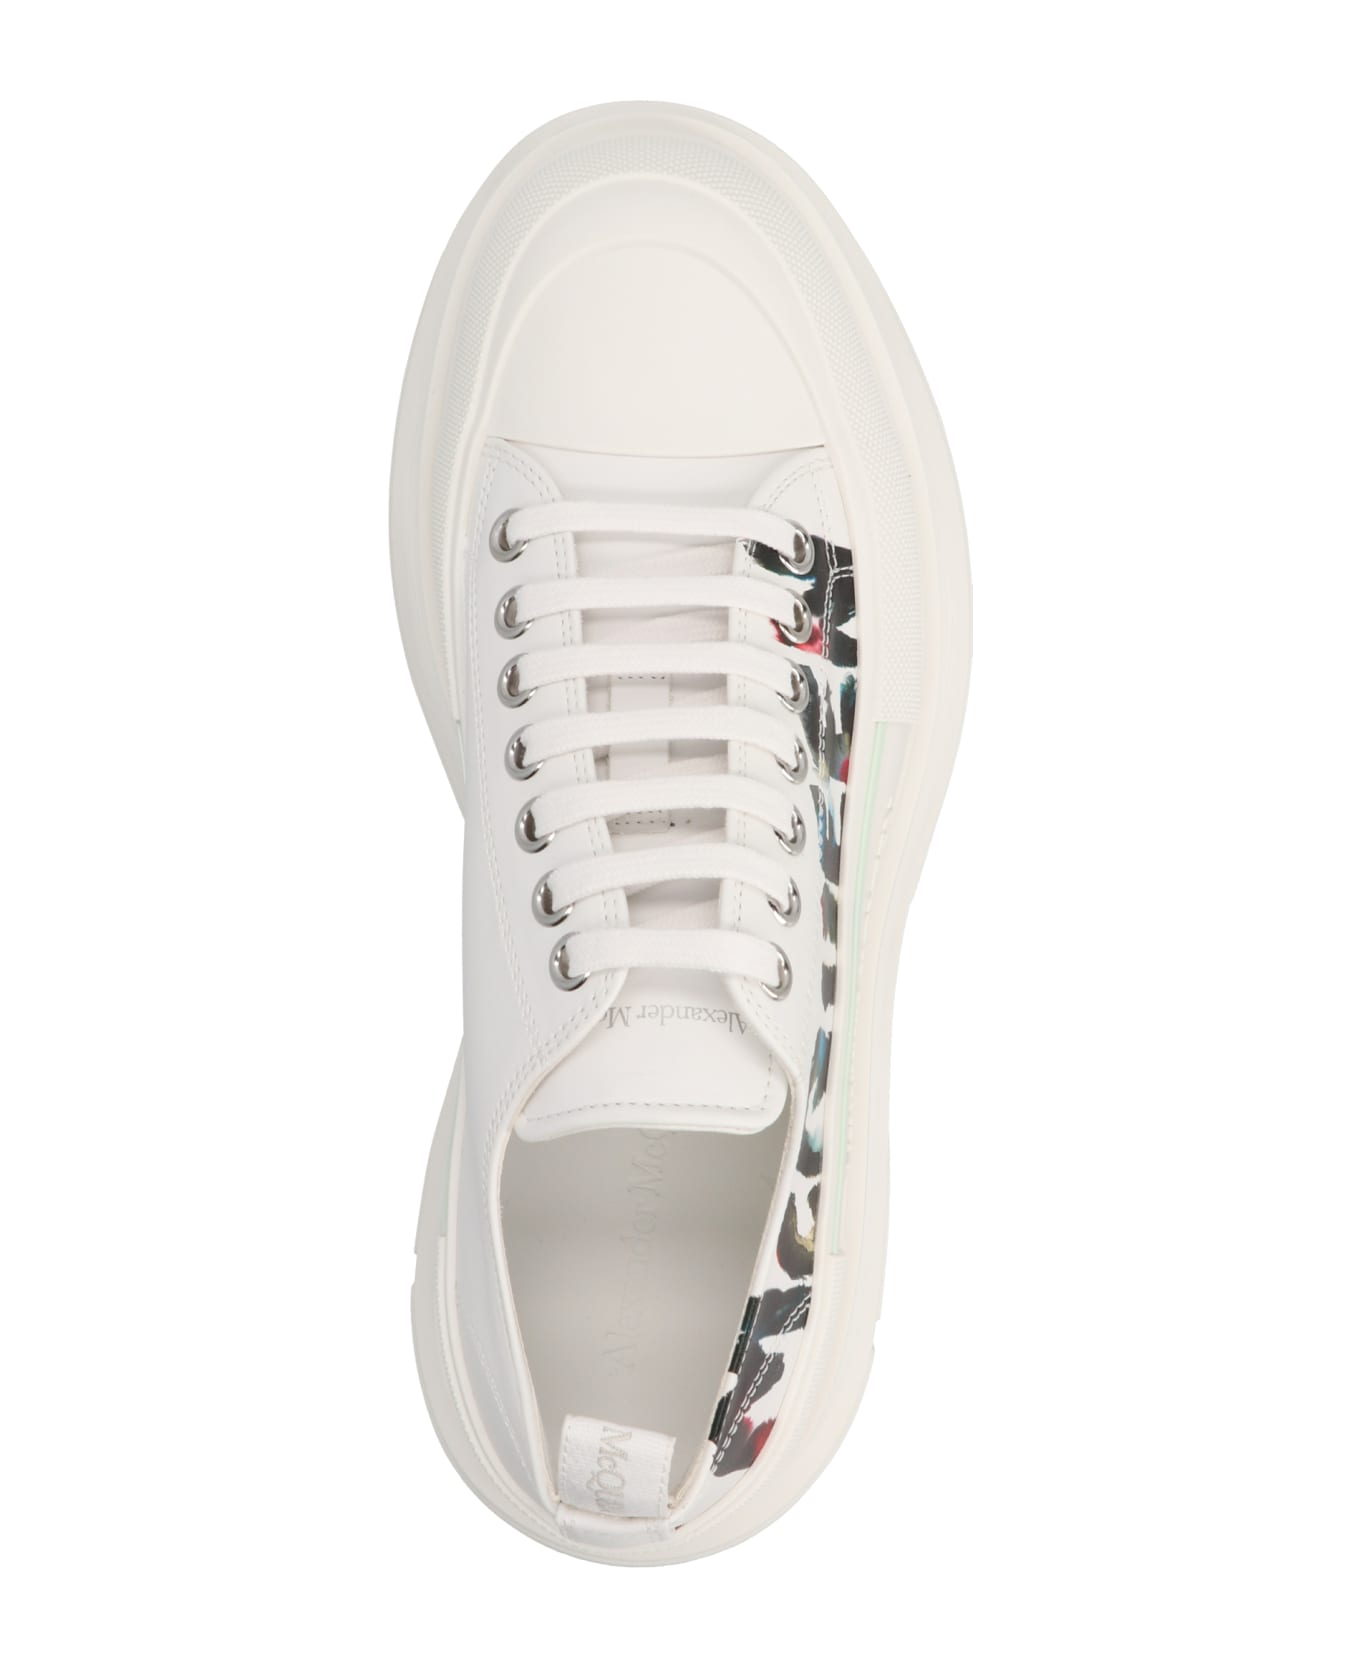 Alexander McQueen Tread Slick Lace-up Shoes - Op Wh Whi Sil Multi